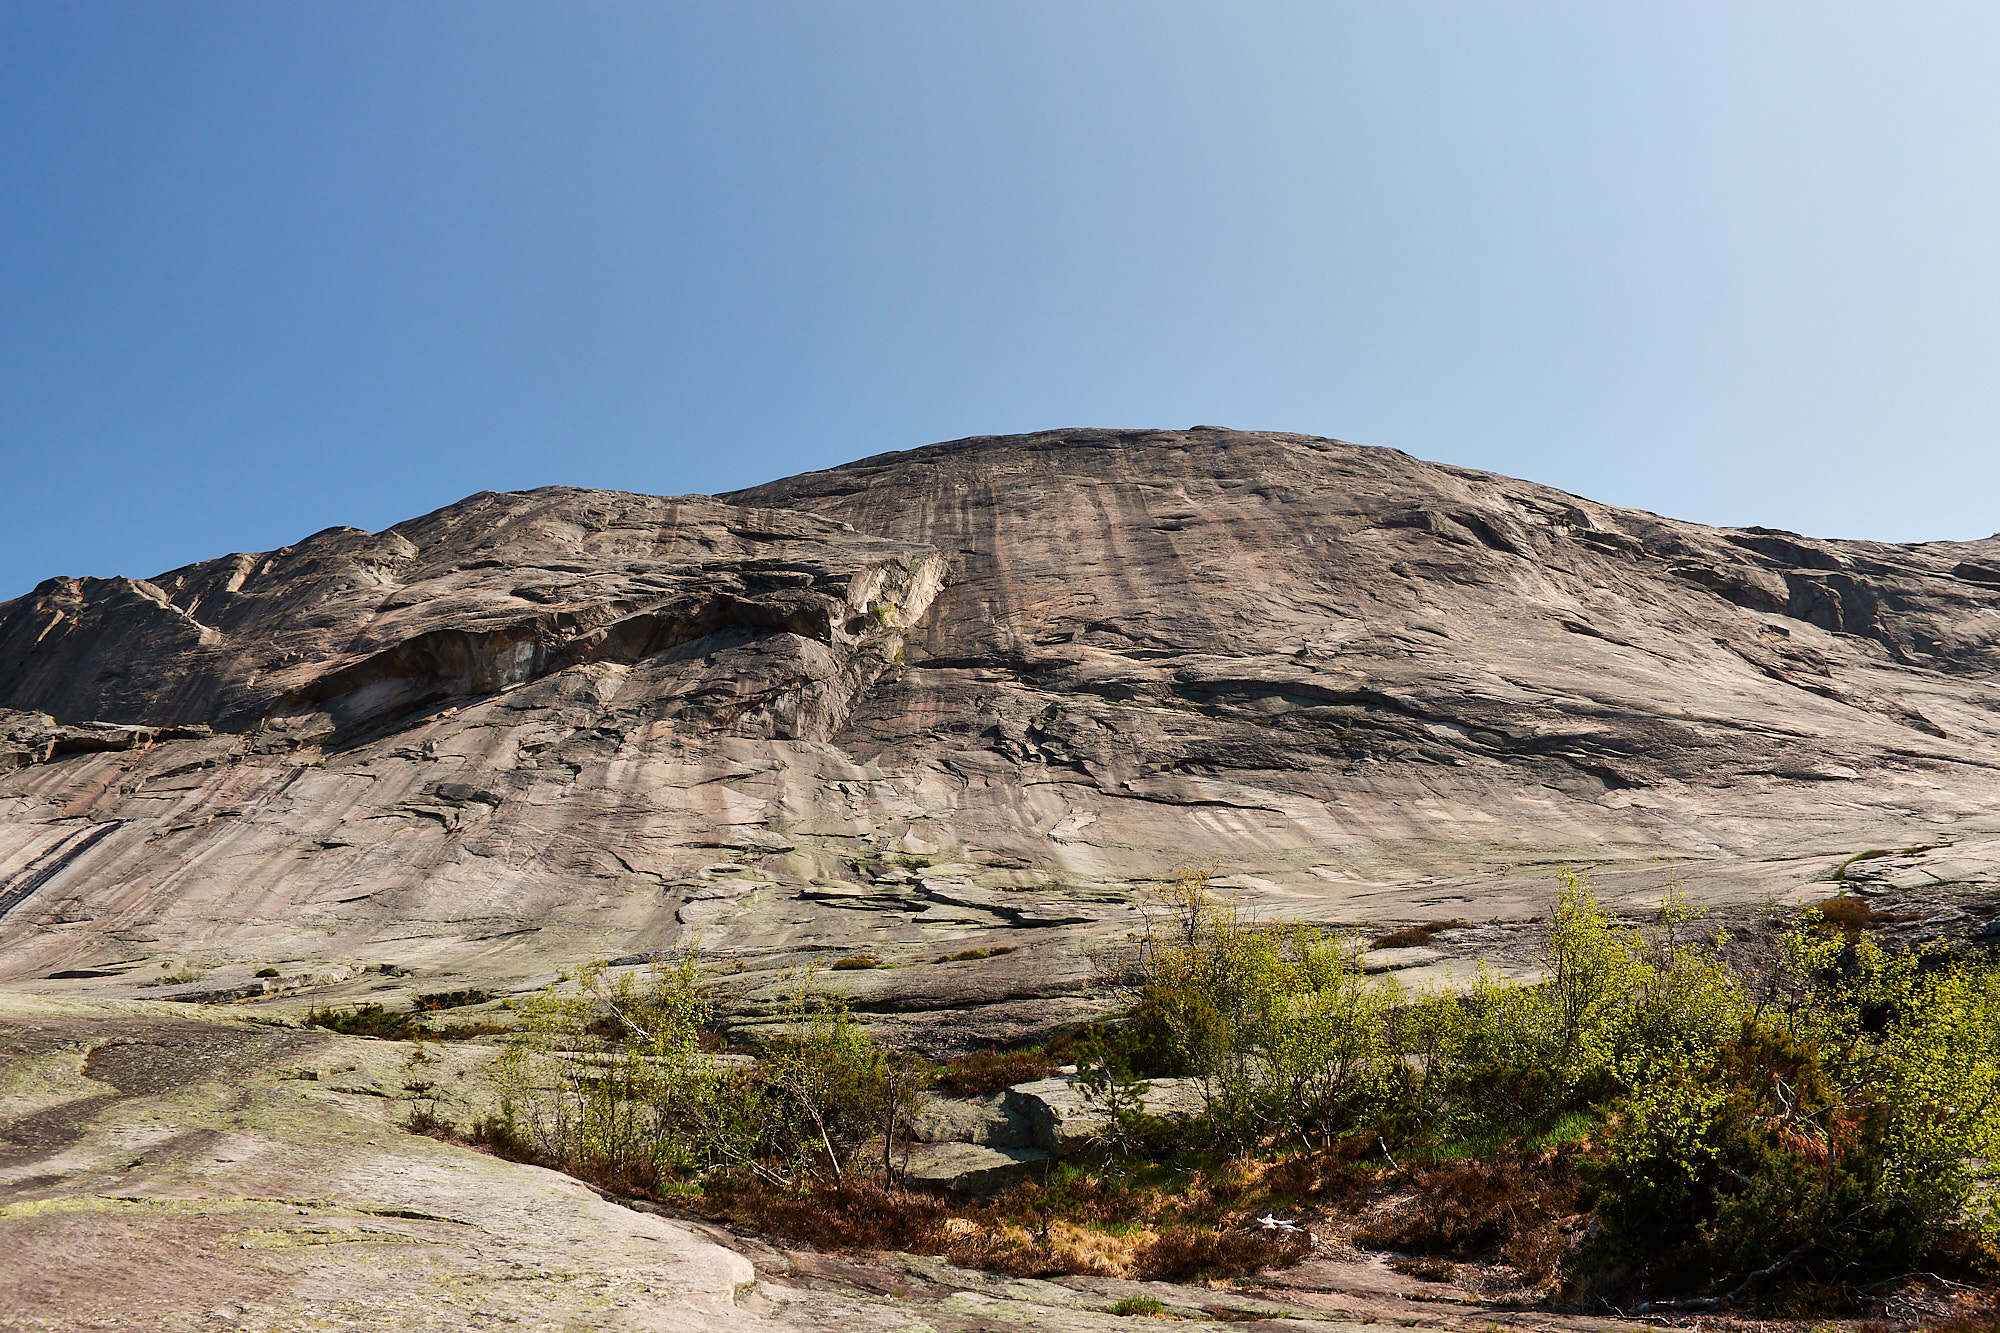 A view of the climb called Haegar on the south face of Haegefjell